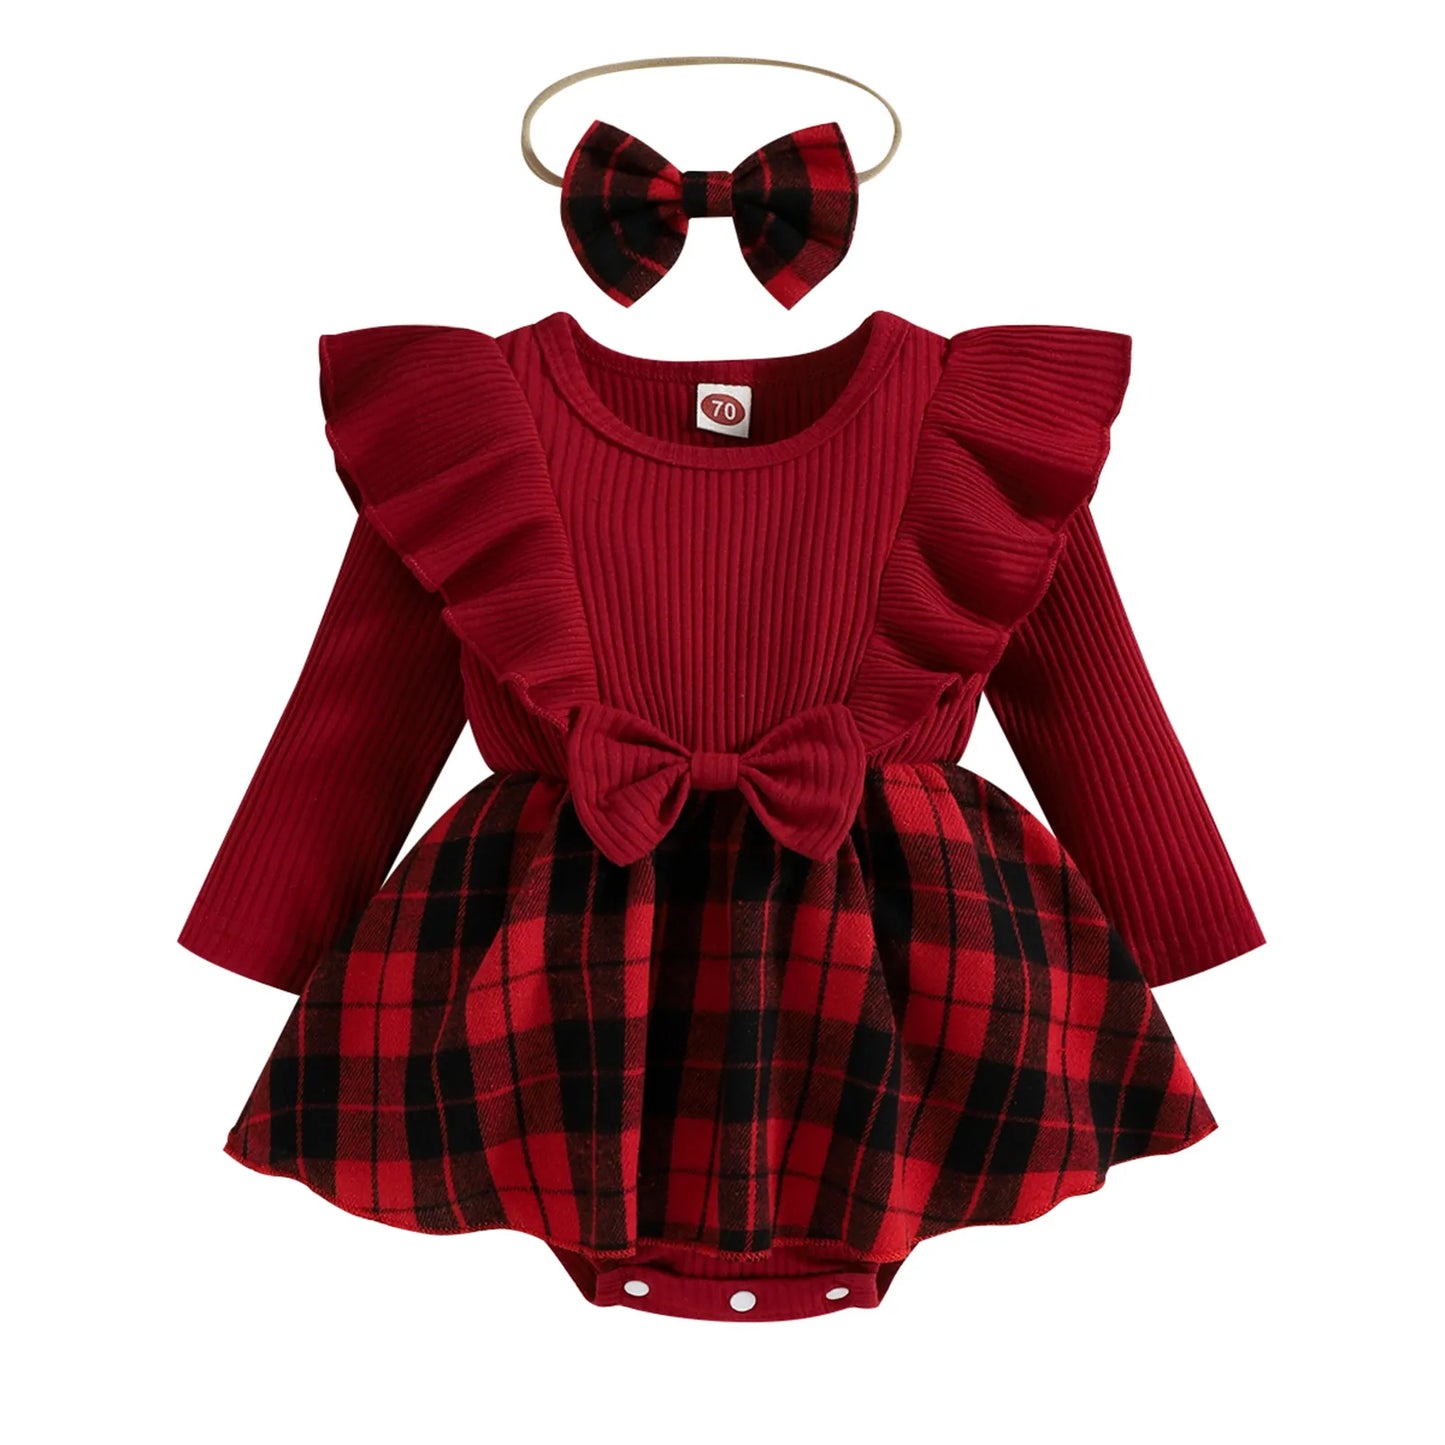 Baby 0-24M Christmas Girl Red Romper, Baby Knit Ruffle Long Sleeve Jumpsuit Plaid Print Xmas